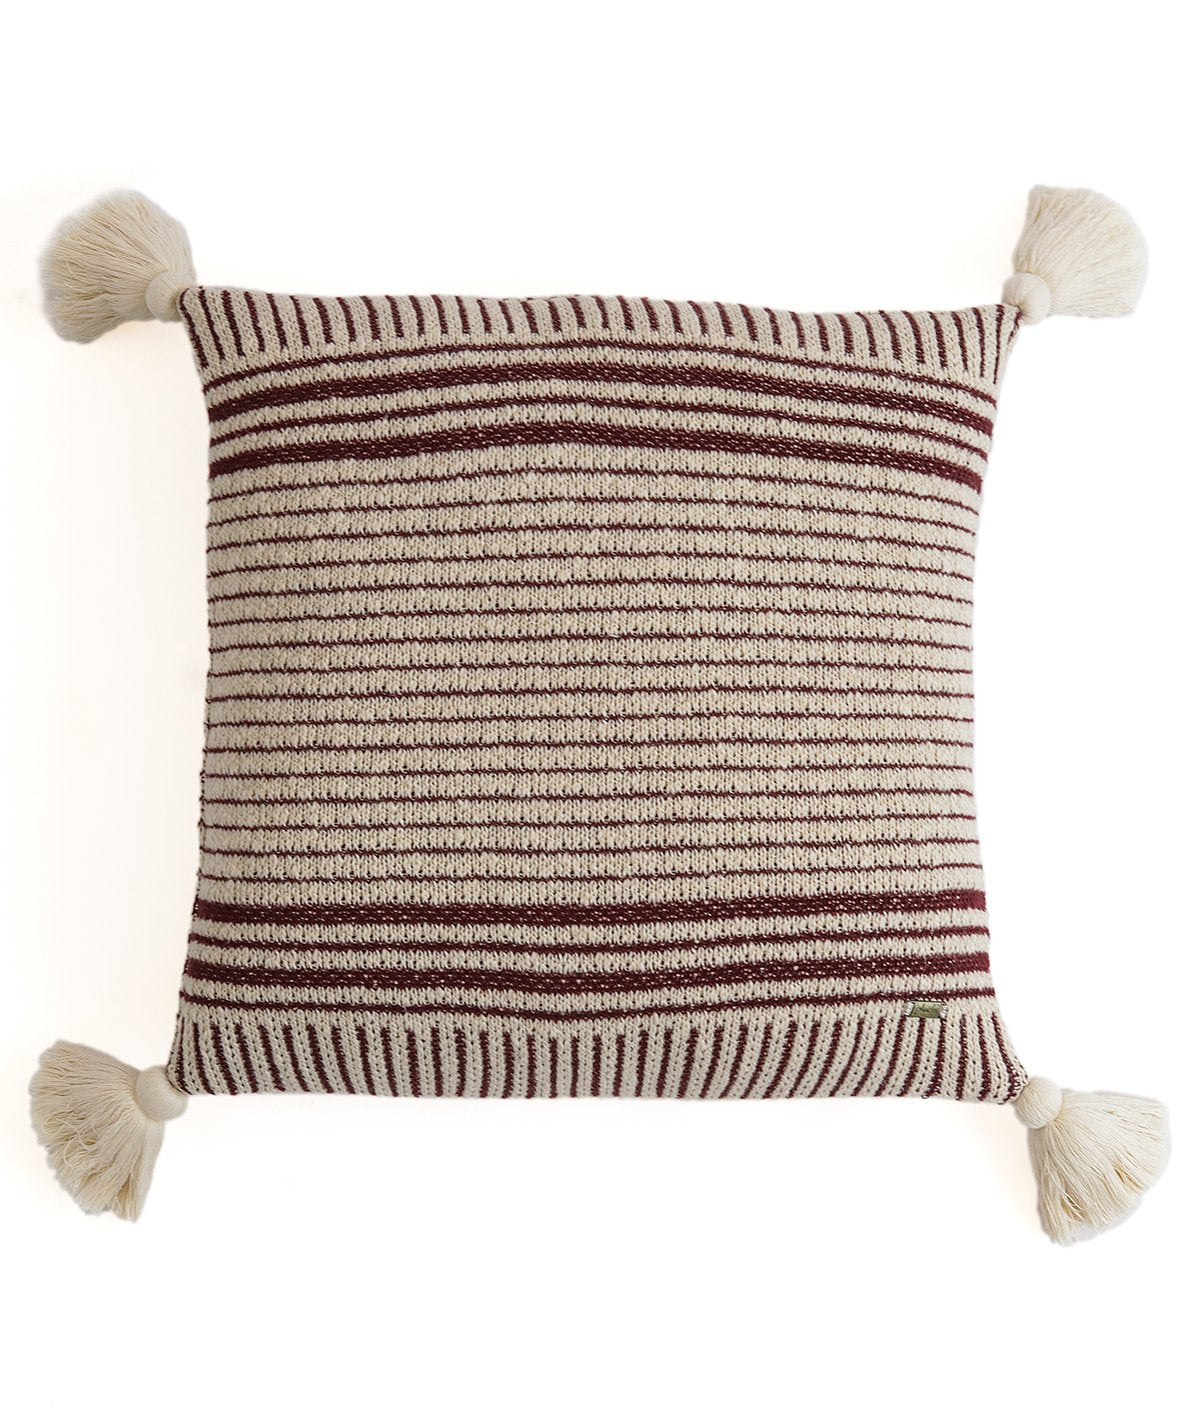 Stripe Square Cotton Knitted Decorative Natural & Maroon Color 18 x 18 Inches Cushion Cover